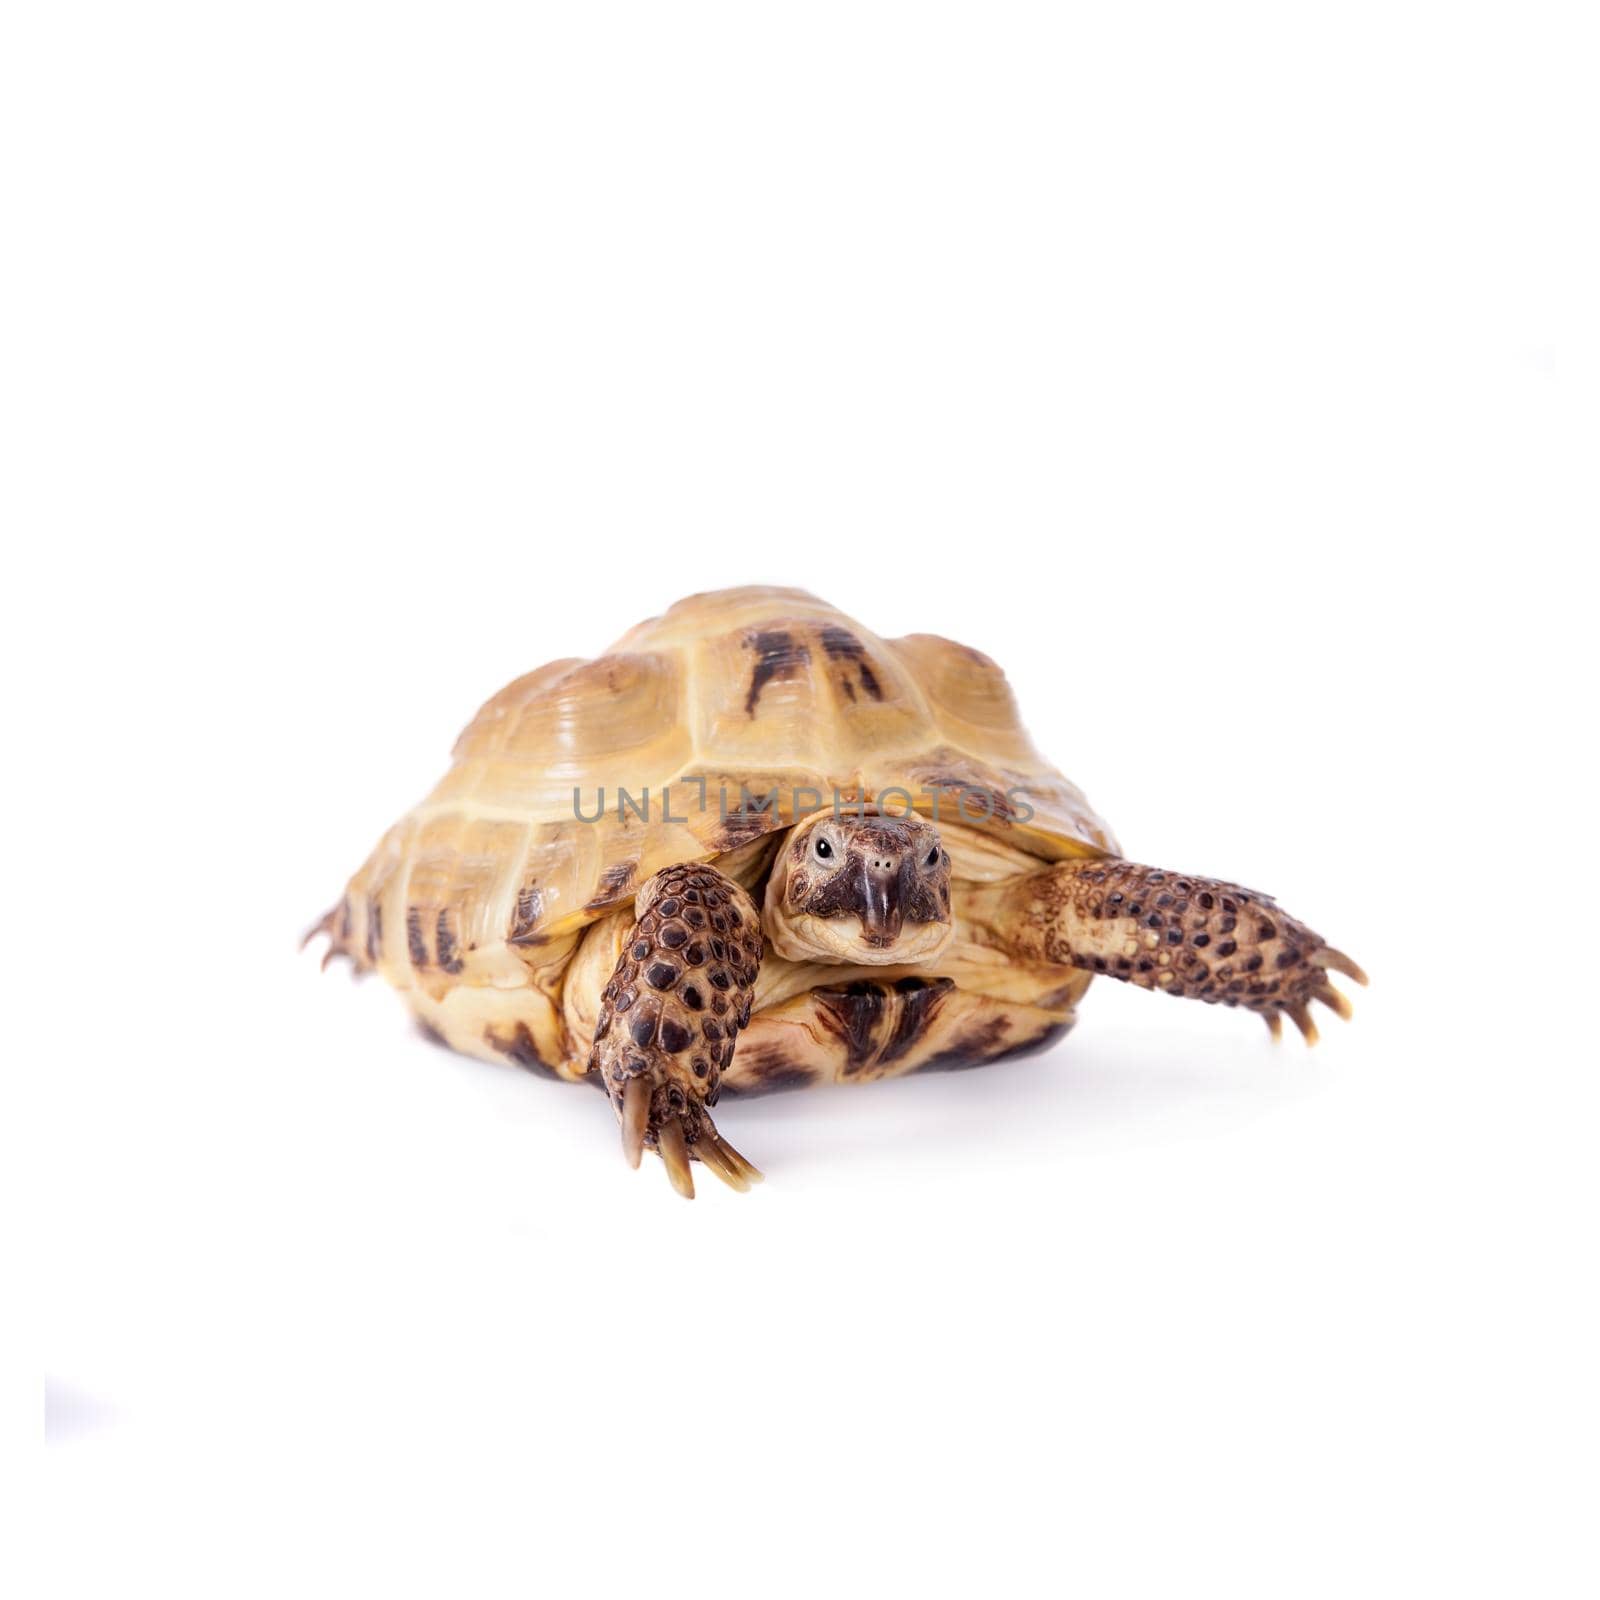 Central Asian tortoise on white background by RosaJay